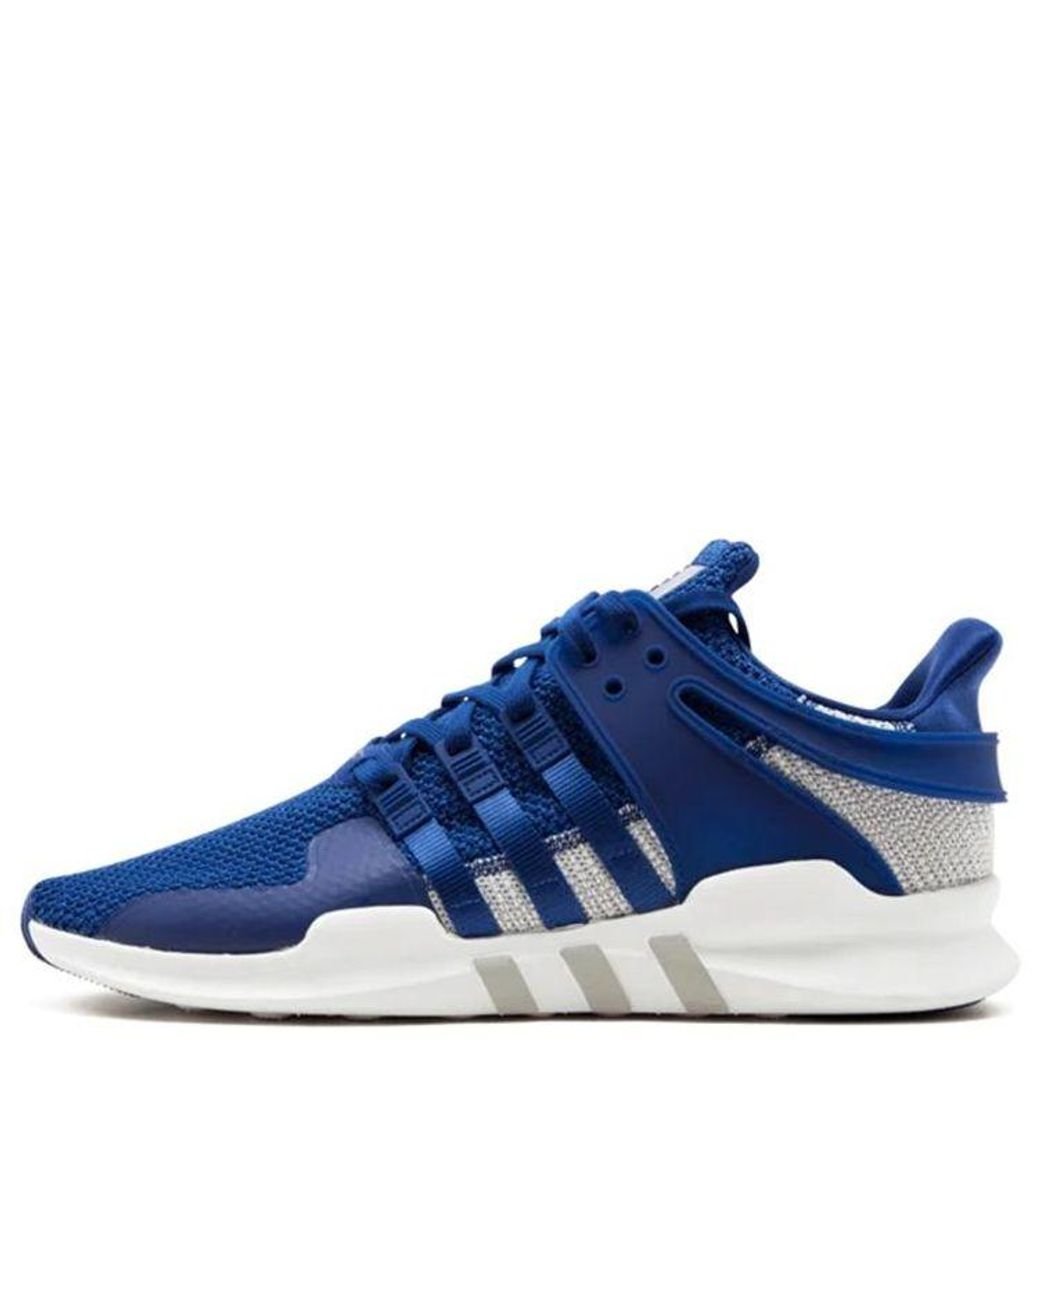 adidas Originals Eqt Support Adv Sneakers in Blue for Men | Lyst